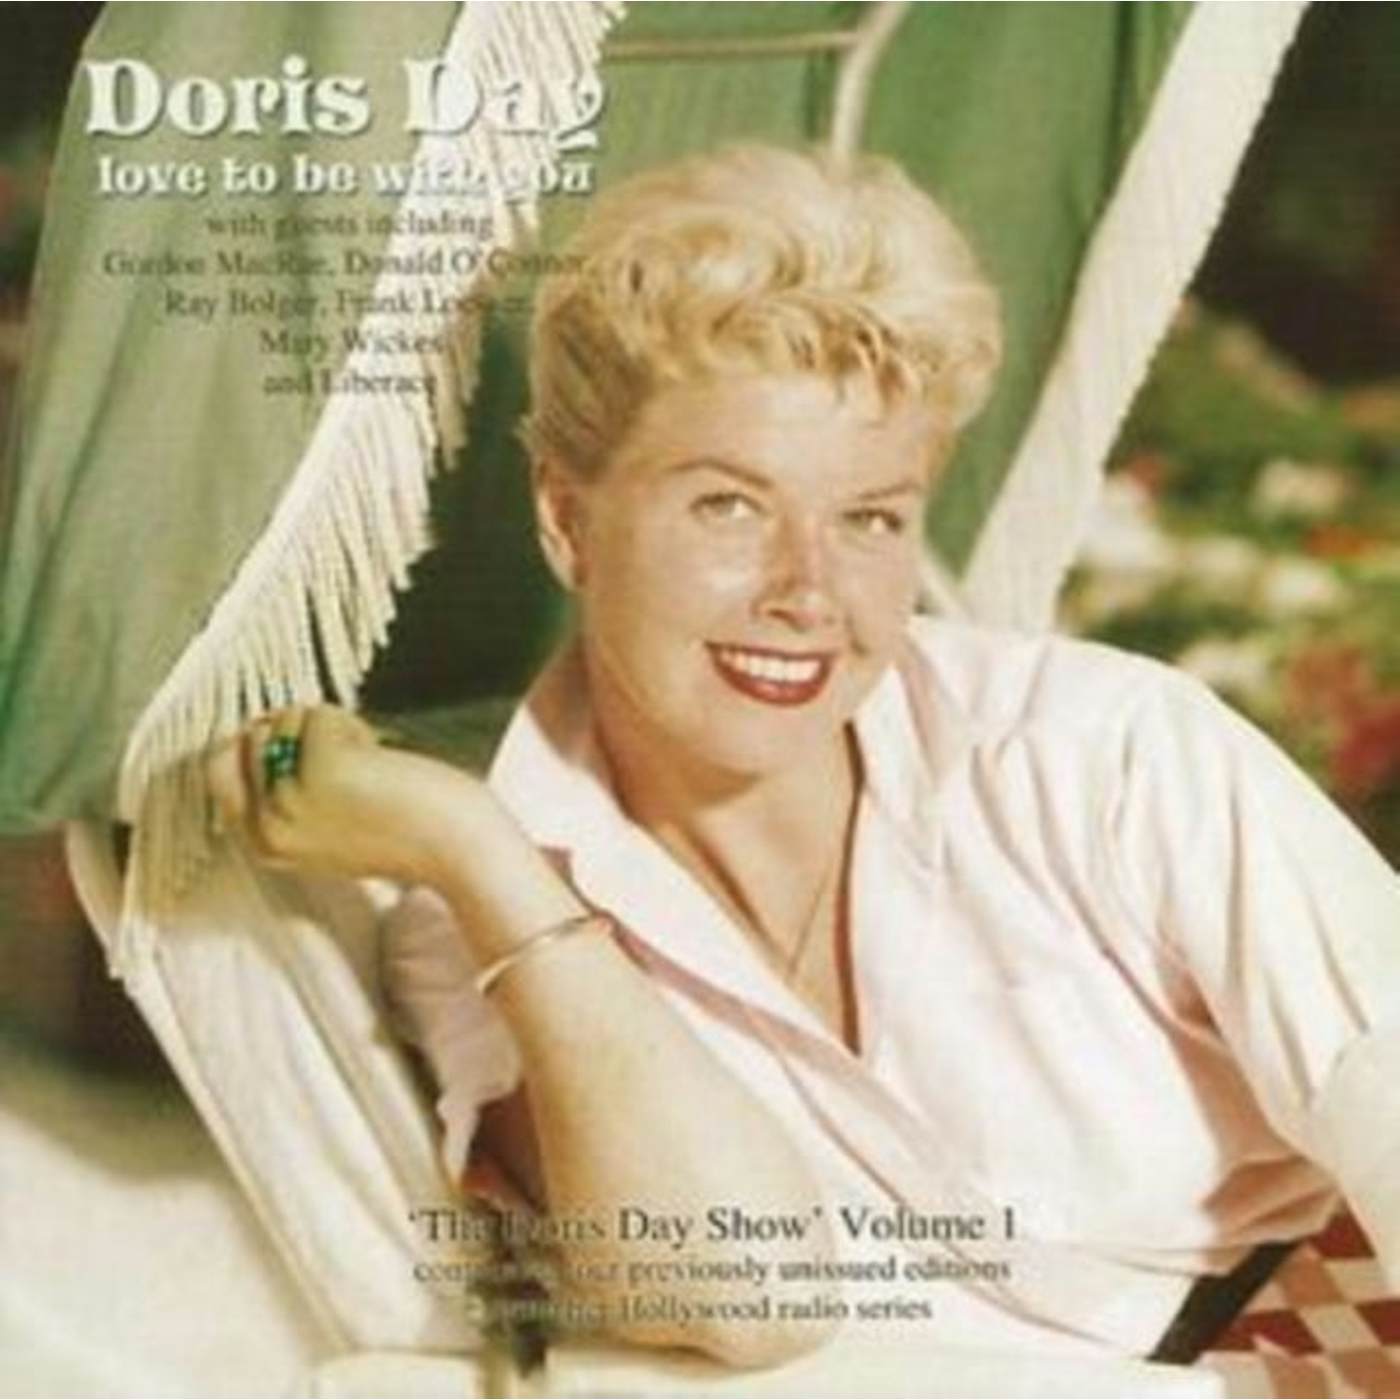 Doris Day CD - Love To Be With You: The Doris Day Show - Volume 1